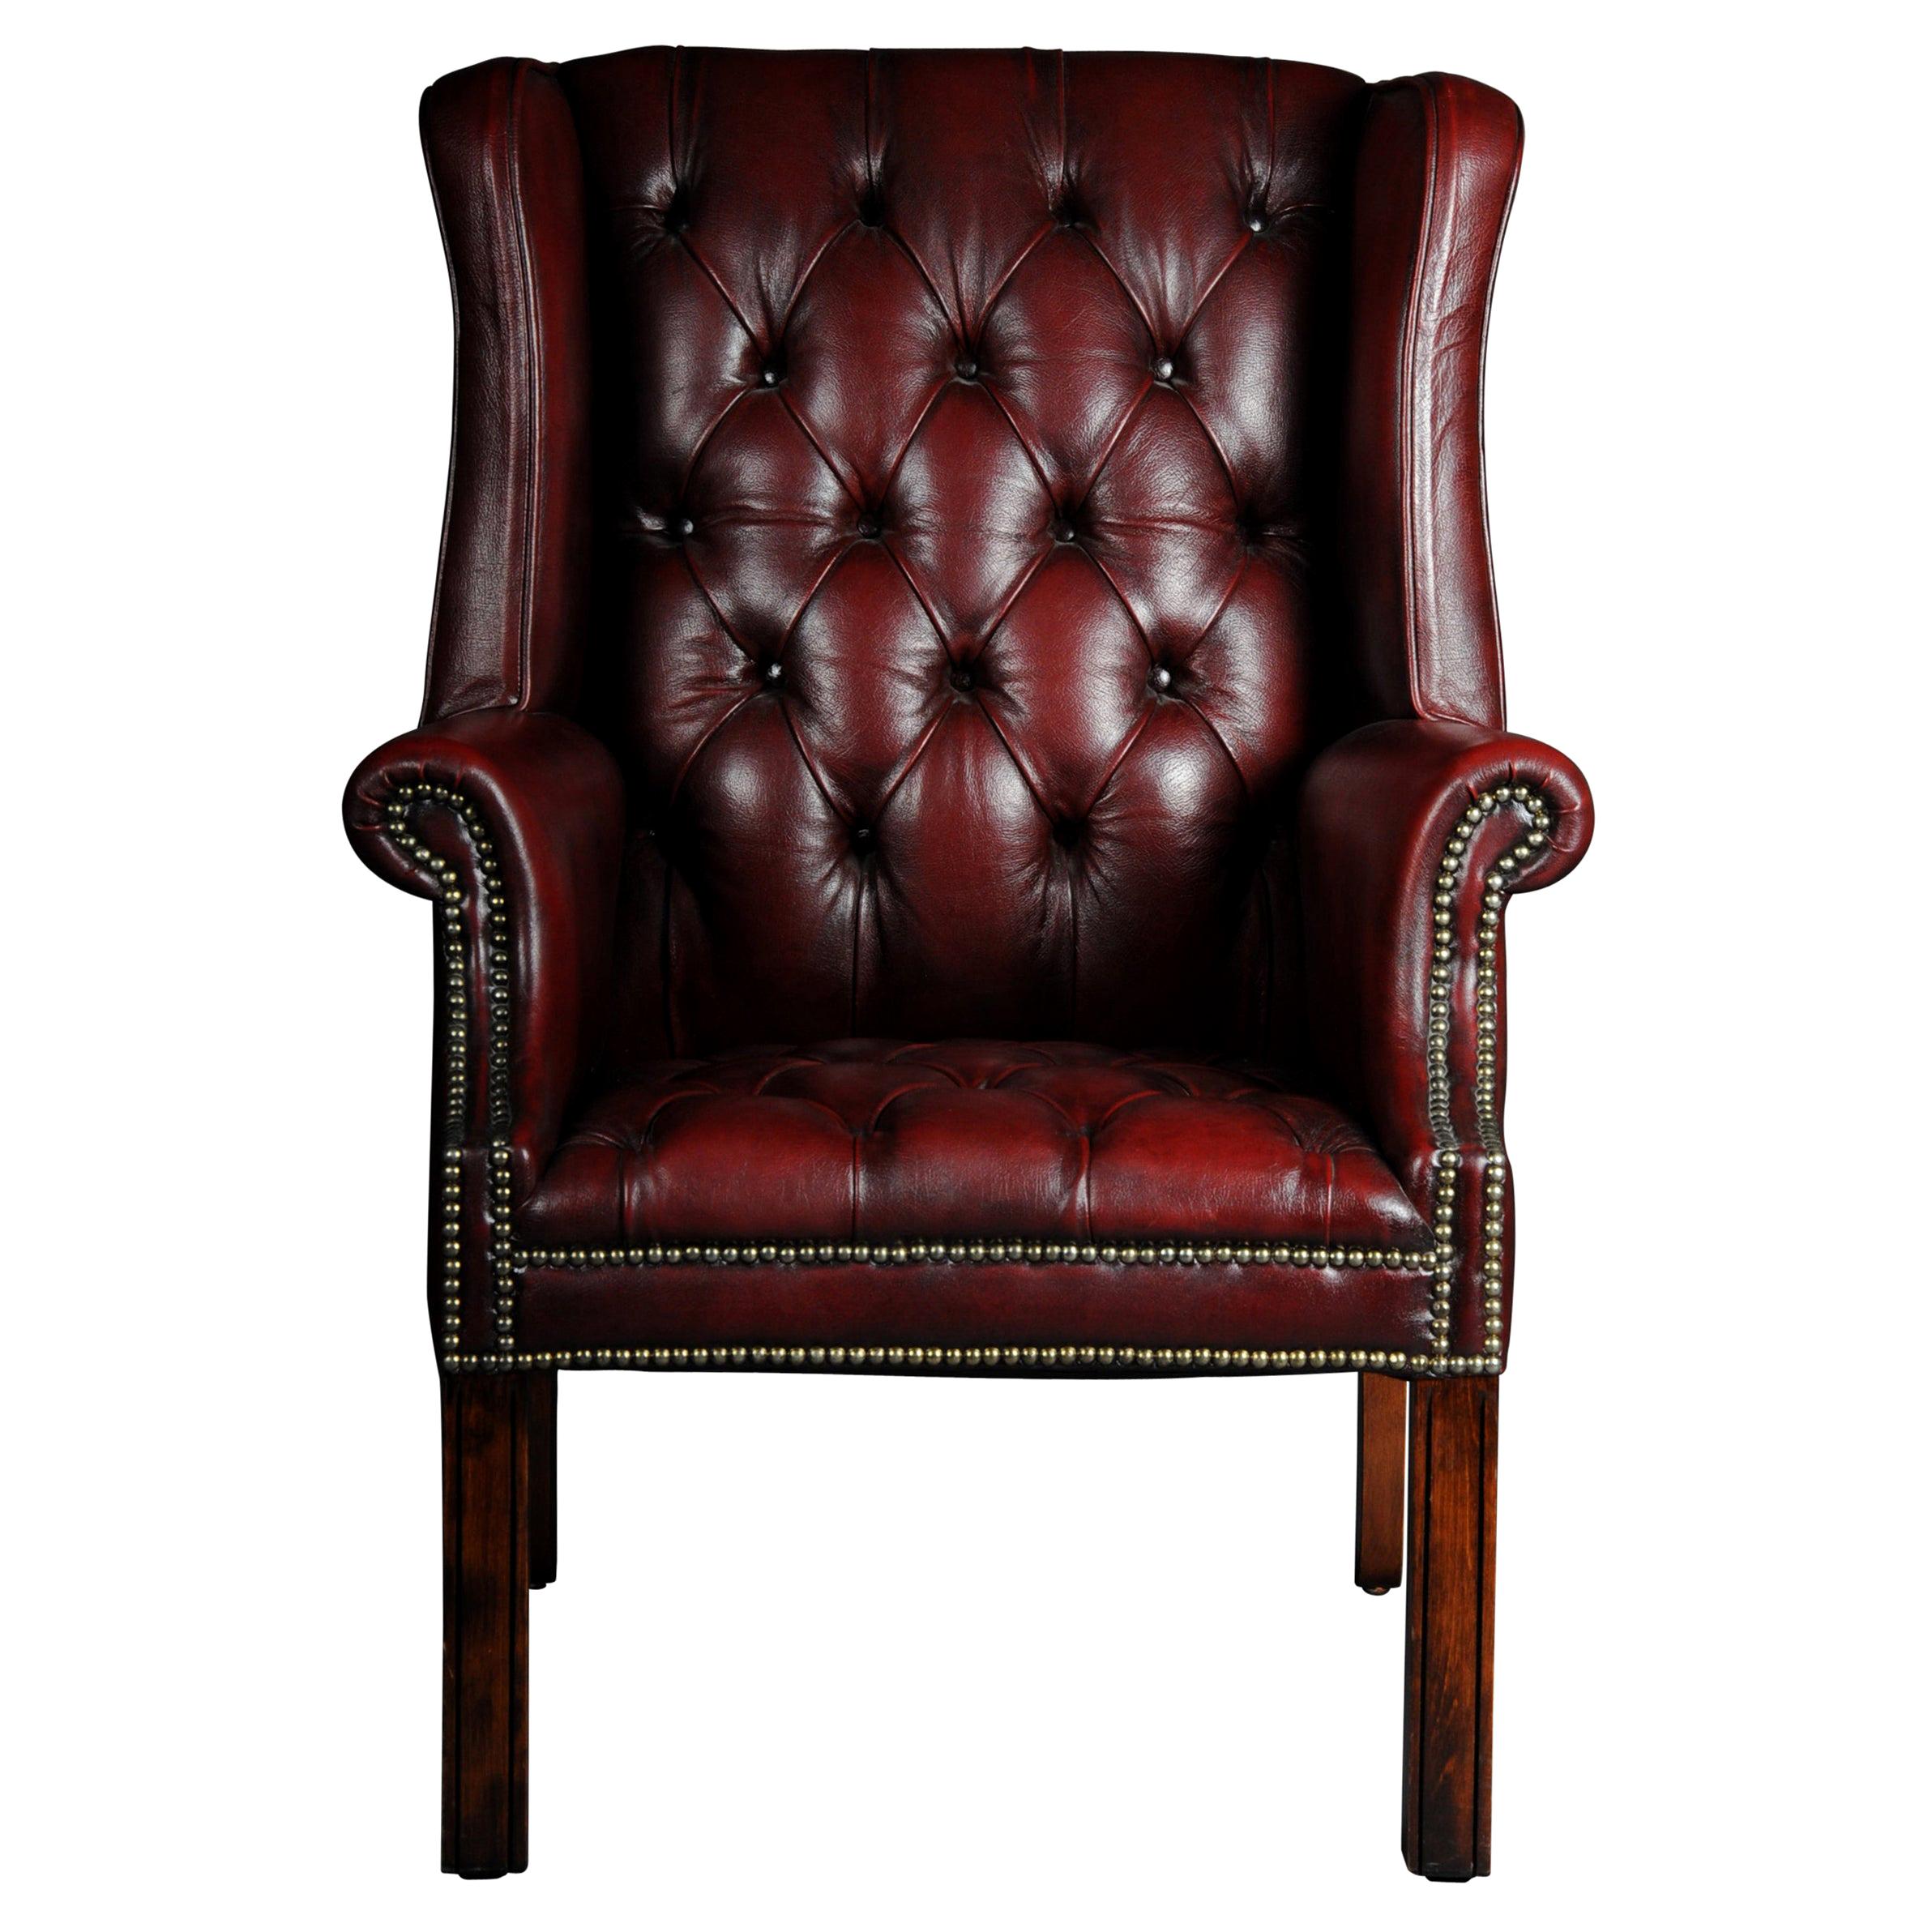 20th Century Classic English Chesterfield Earsback Chair, Leather For Sale